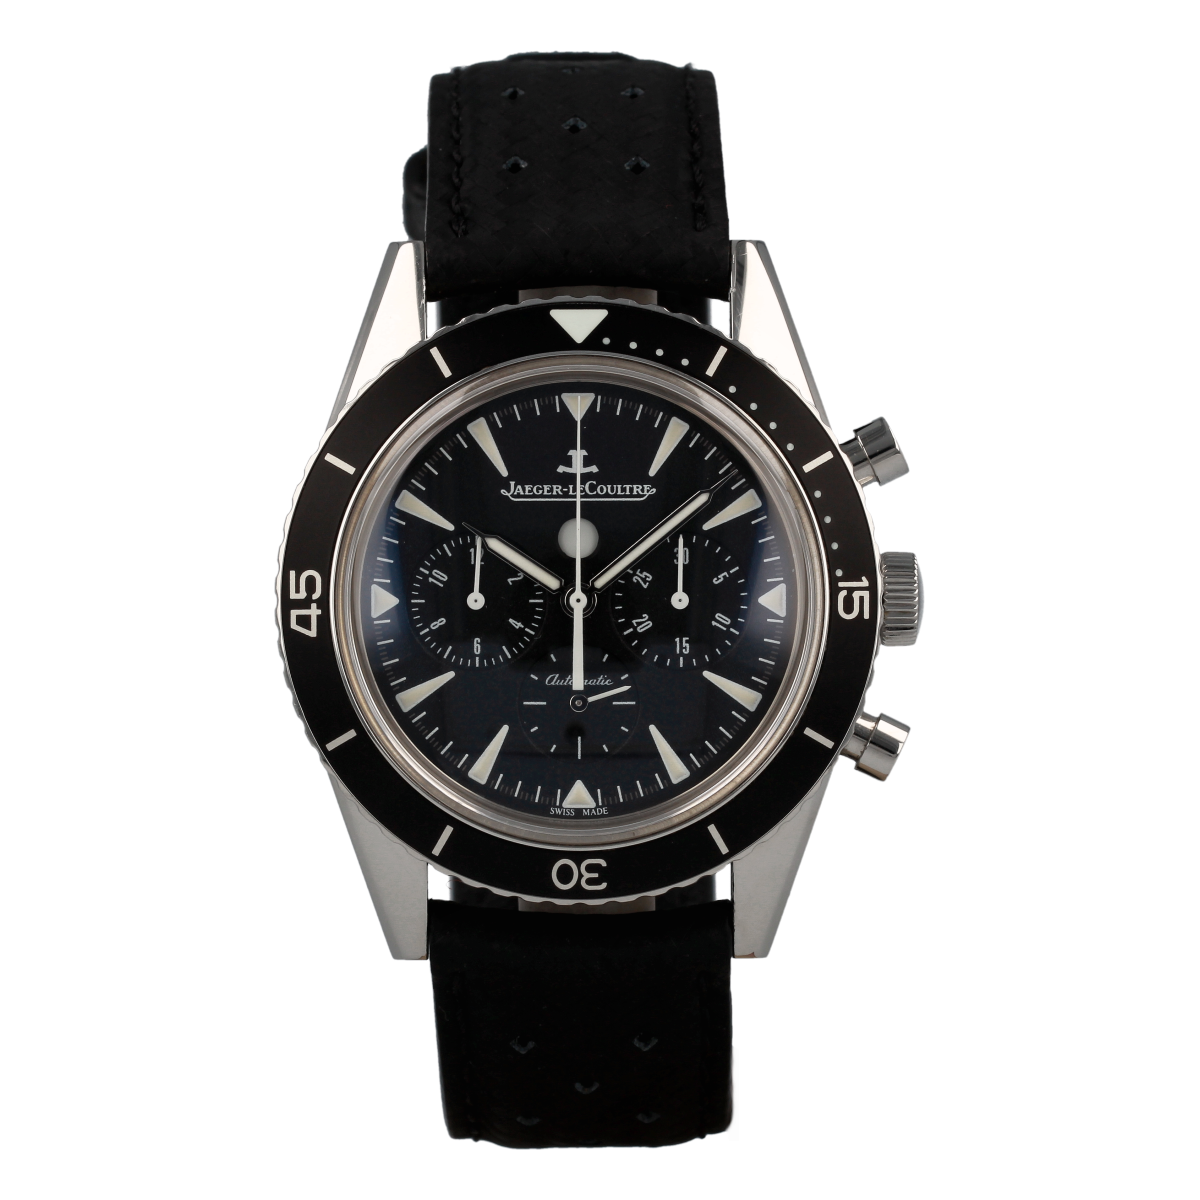 Jaeger-LeCoultre Deep Sea Chronograph | Buy pre-owned Jaeger-LeCoultre watch